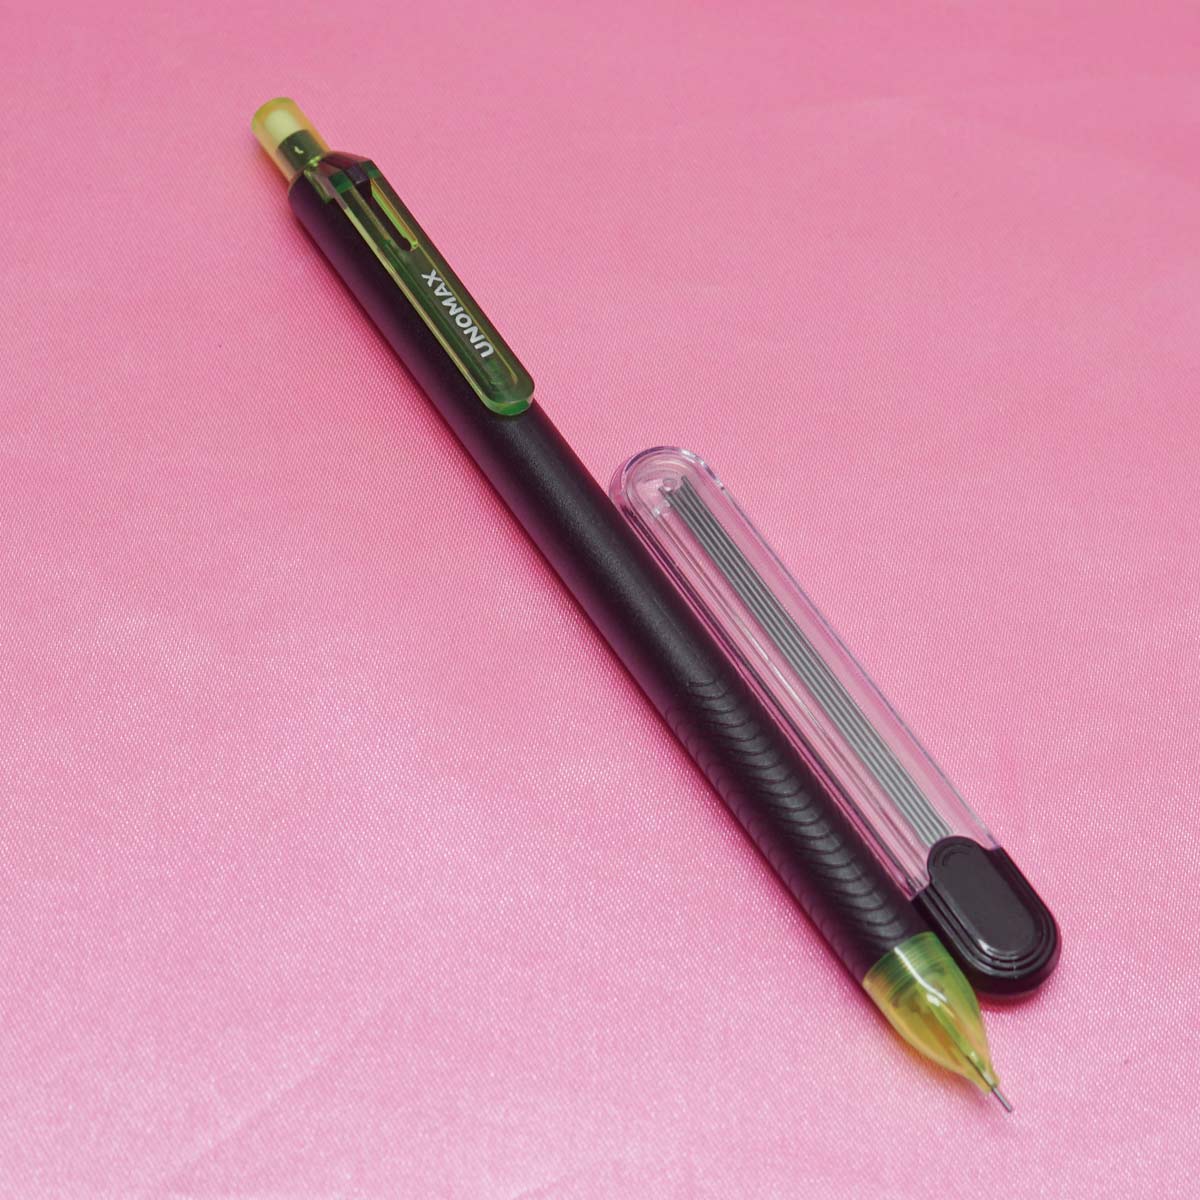 Unomax Mechtron 0.7 Black Color Body With Green Clip Mechanical Pencil SKU 22016